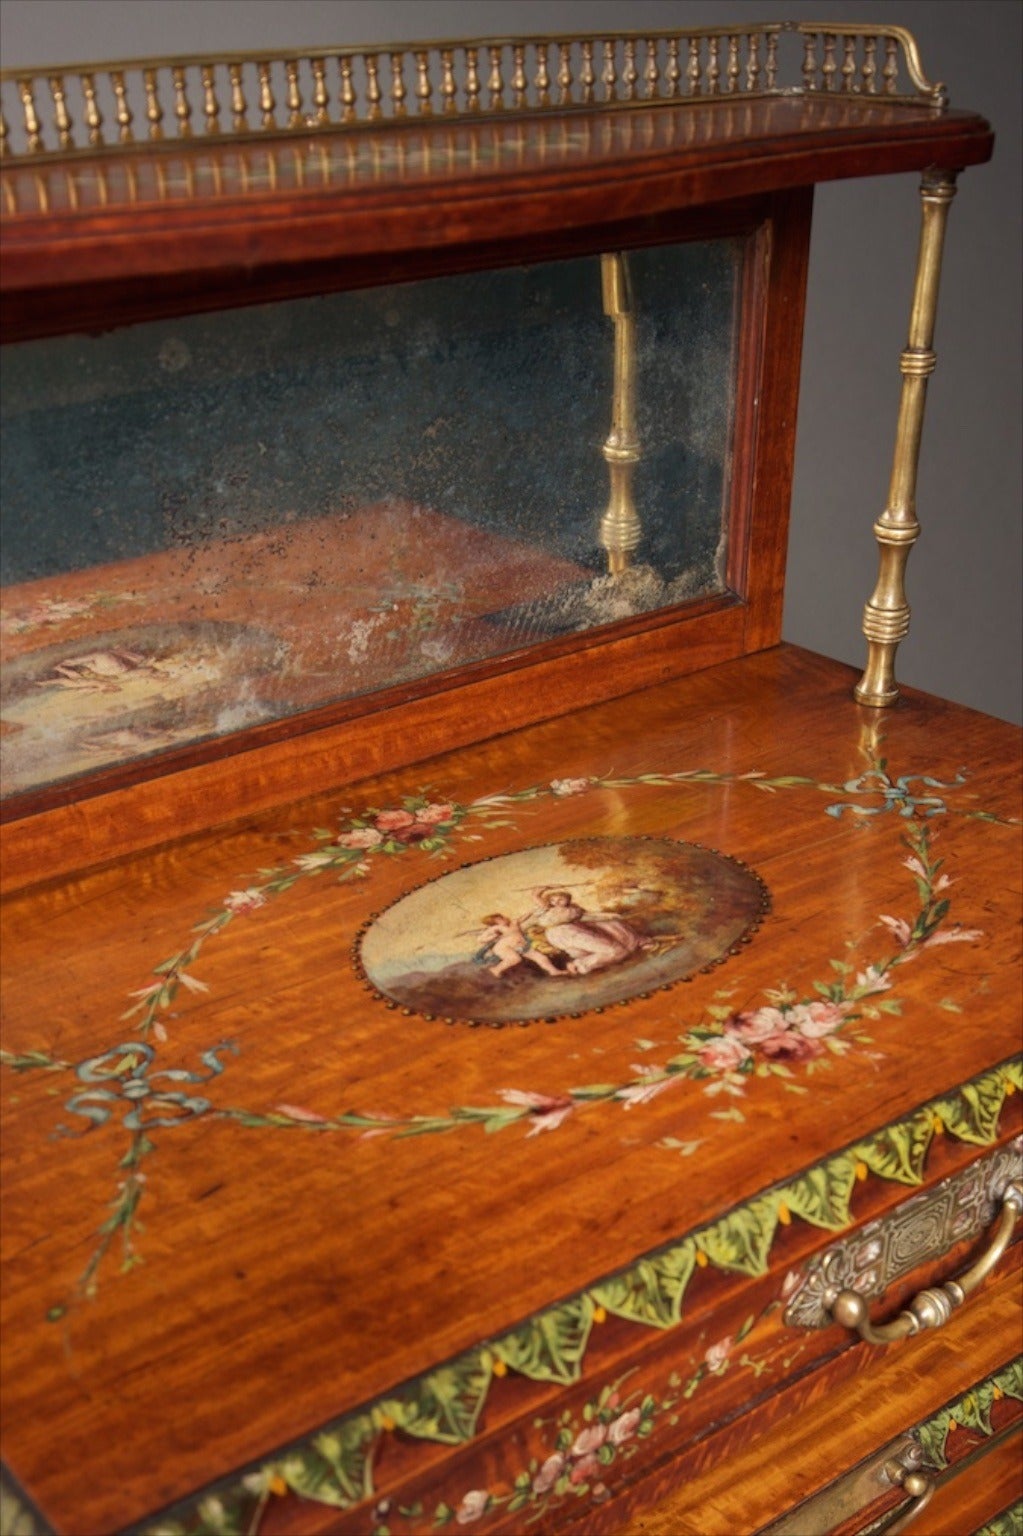 Late 19th century satinwood music canterbury in the Georgian revival style. The painted decoration in the manner of Angelica Kaufmann.